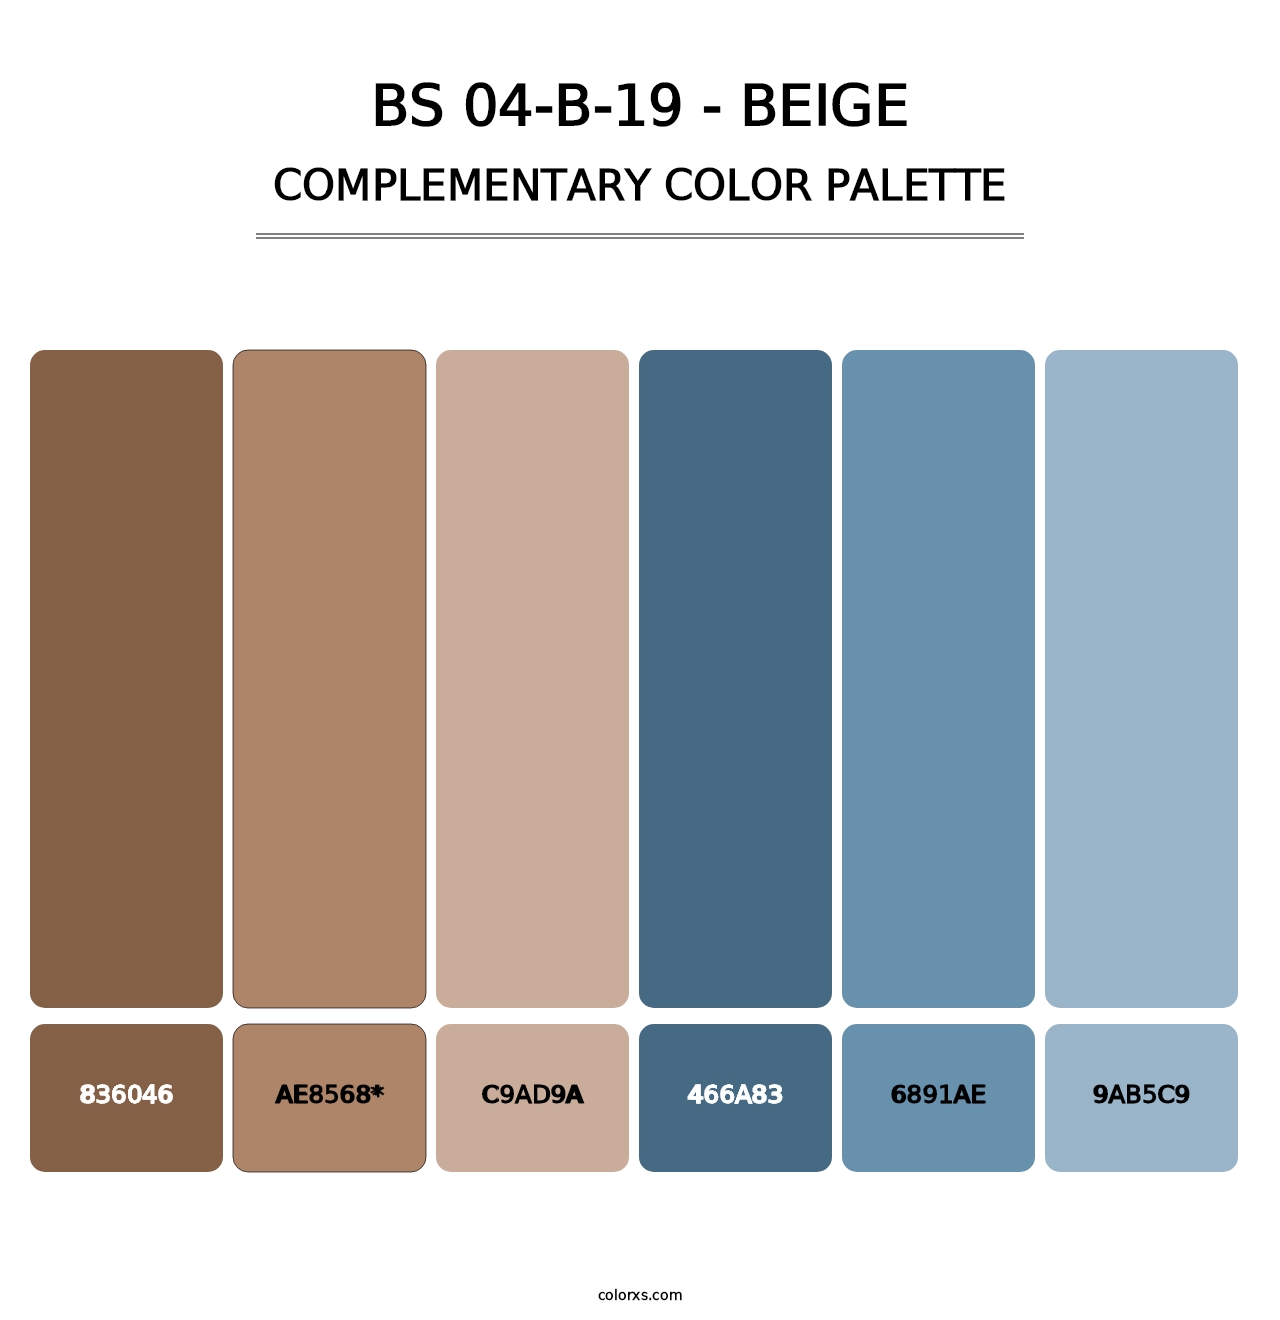 BS 04-B-19 - Beige - Complementary Color Palette